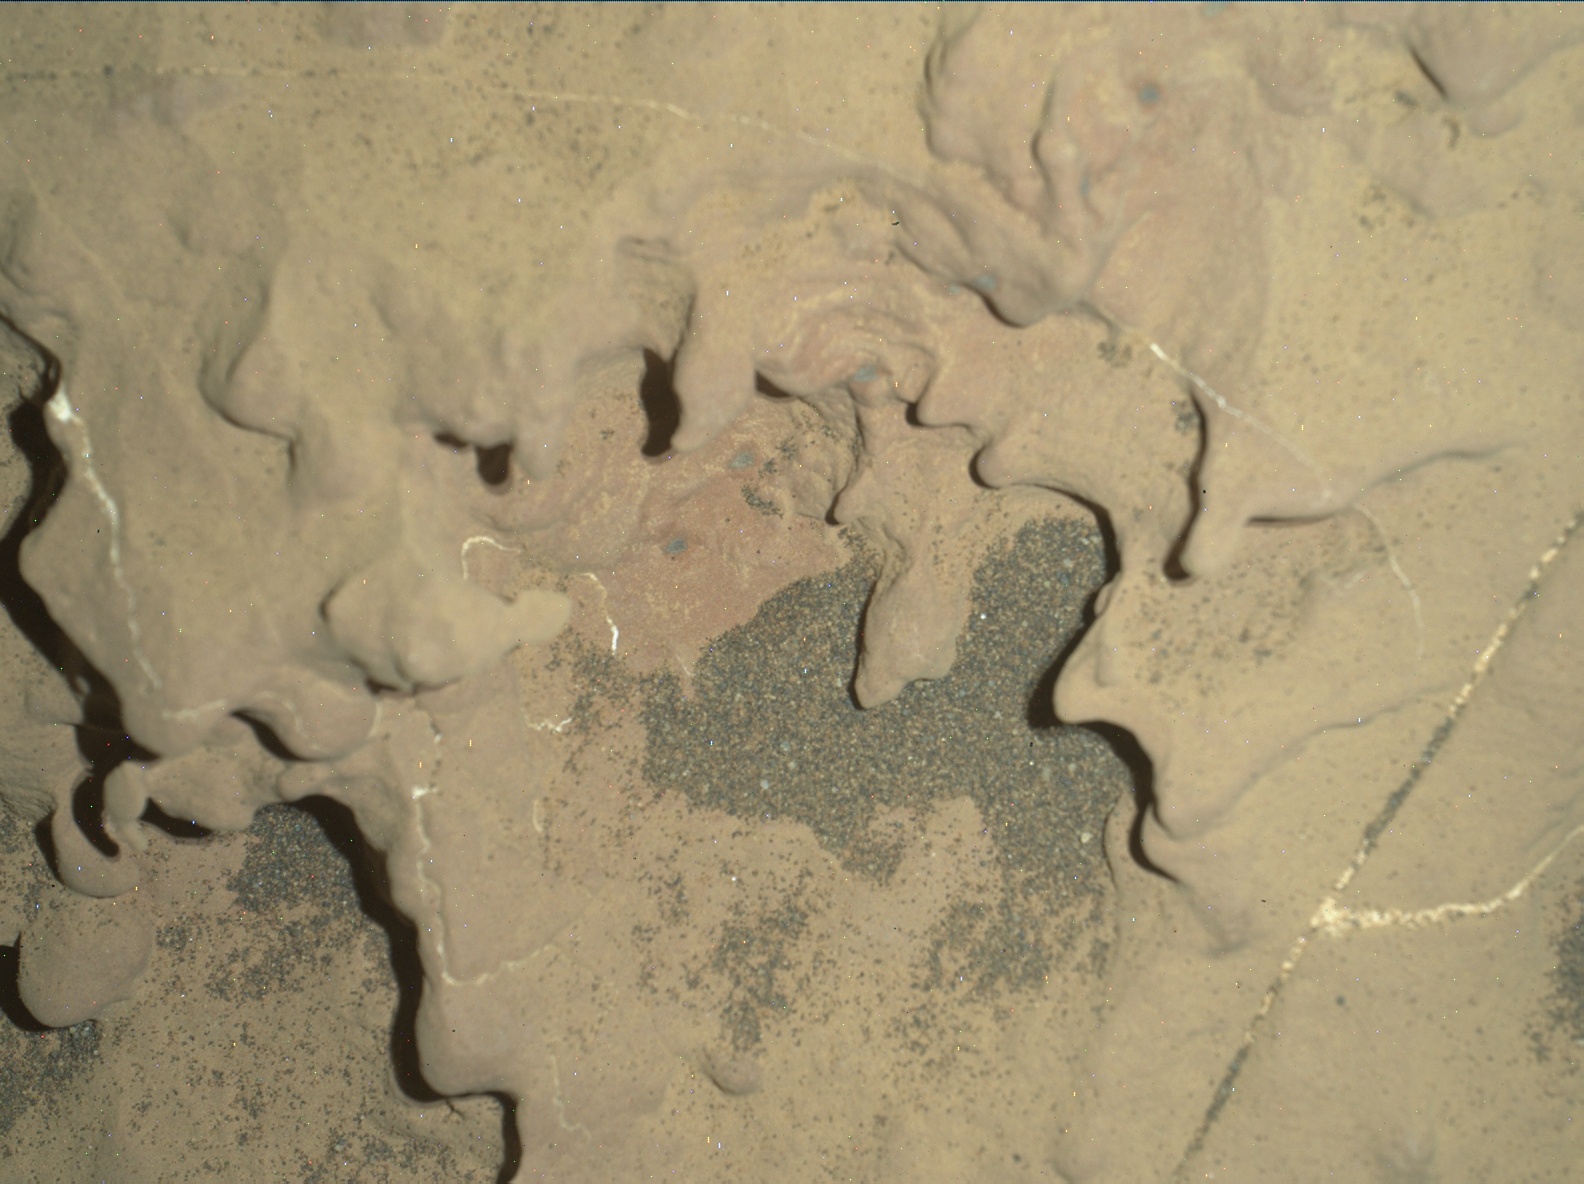 Nasa's Mars rover Curiosity acquired this image using its Mars Hand Lens Imager (MAHLI) on Sol 1865